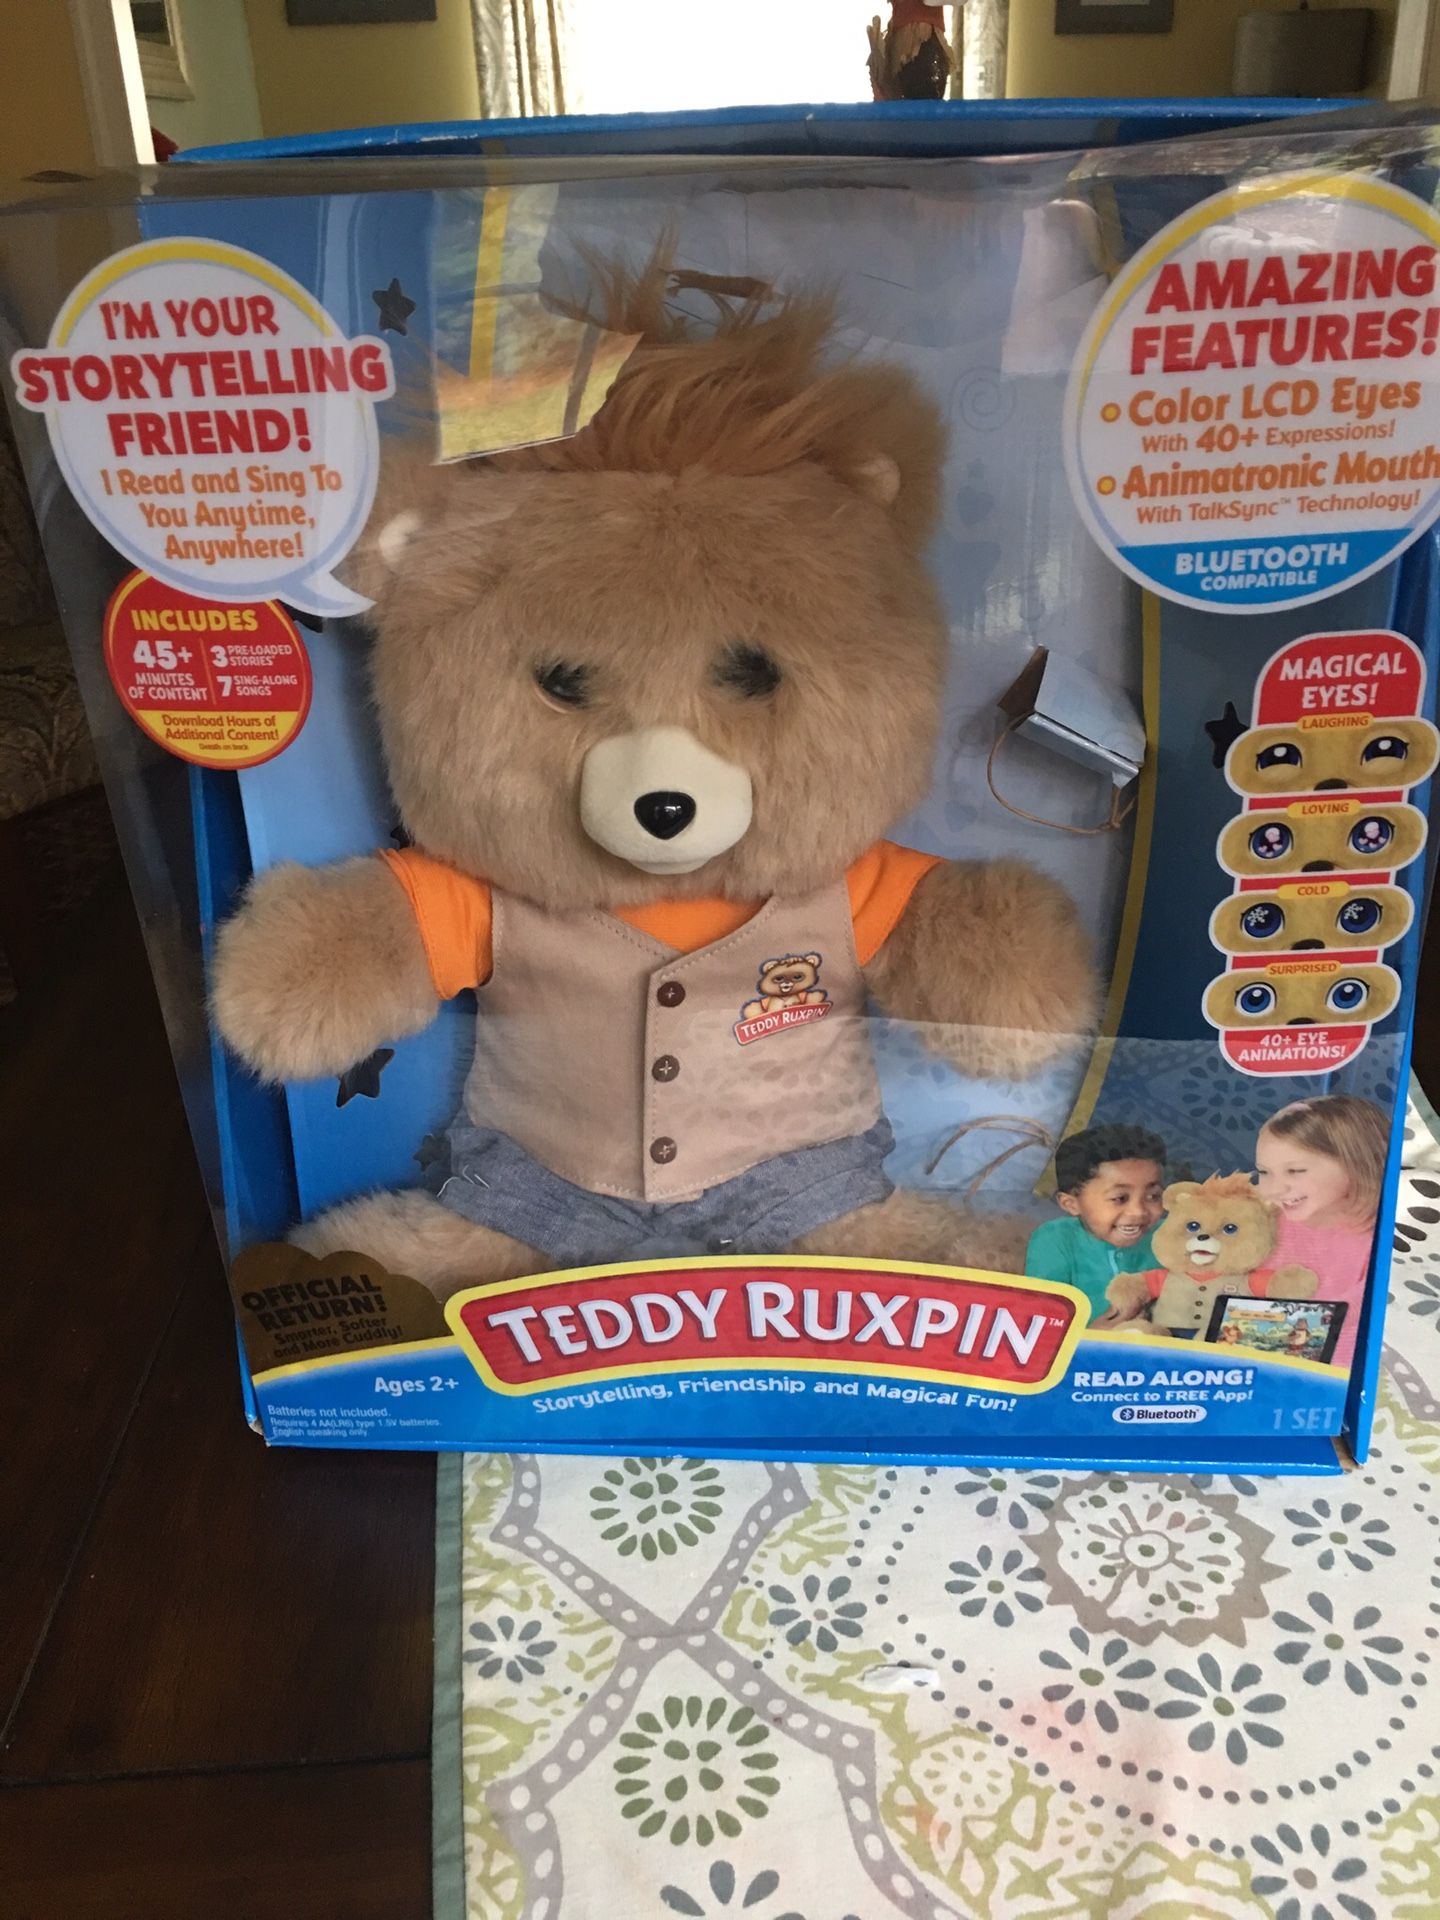 Teddy Ruxpin: Gently used in perfect condition